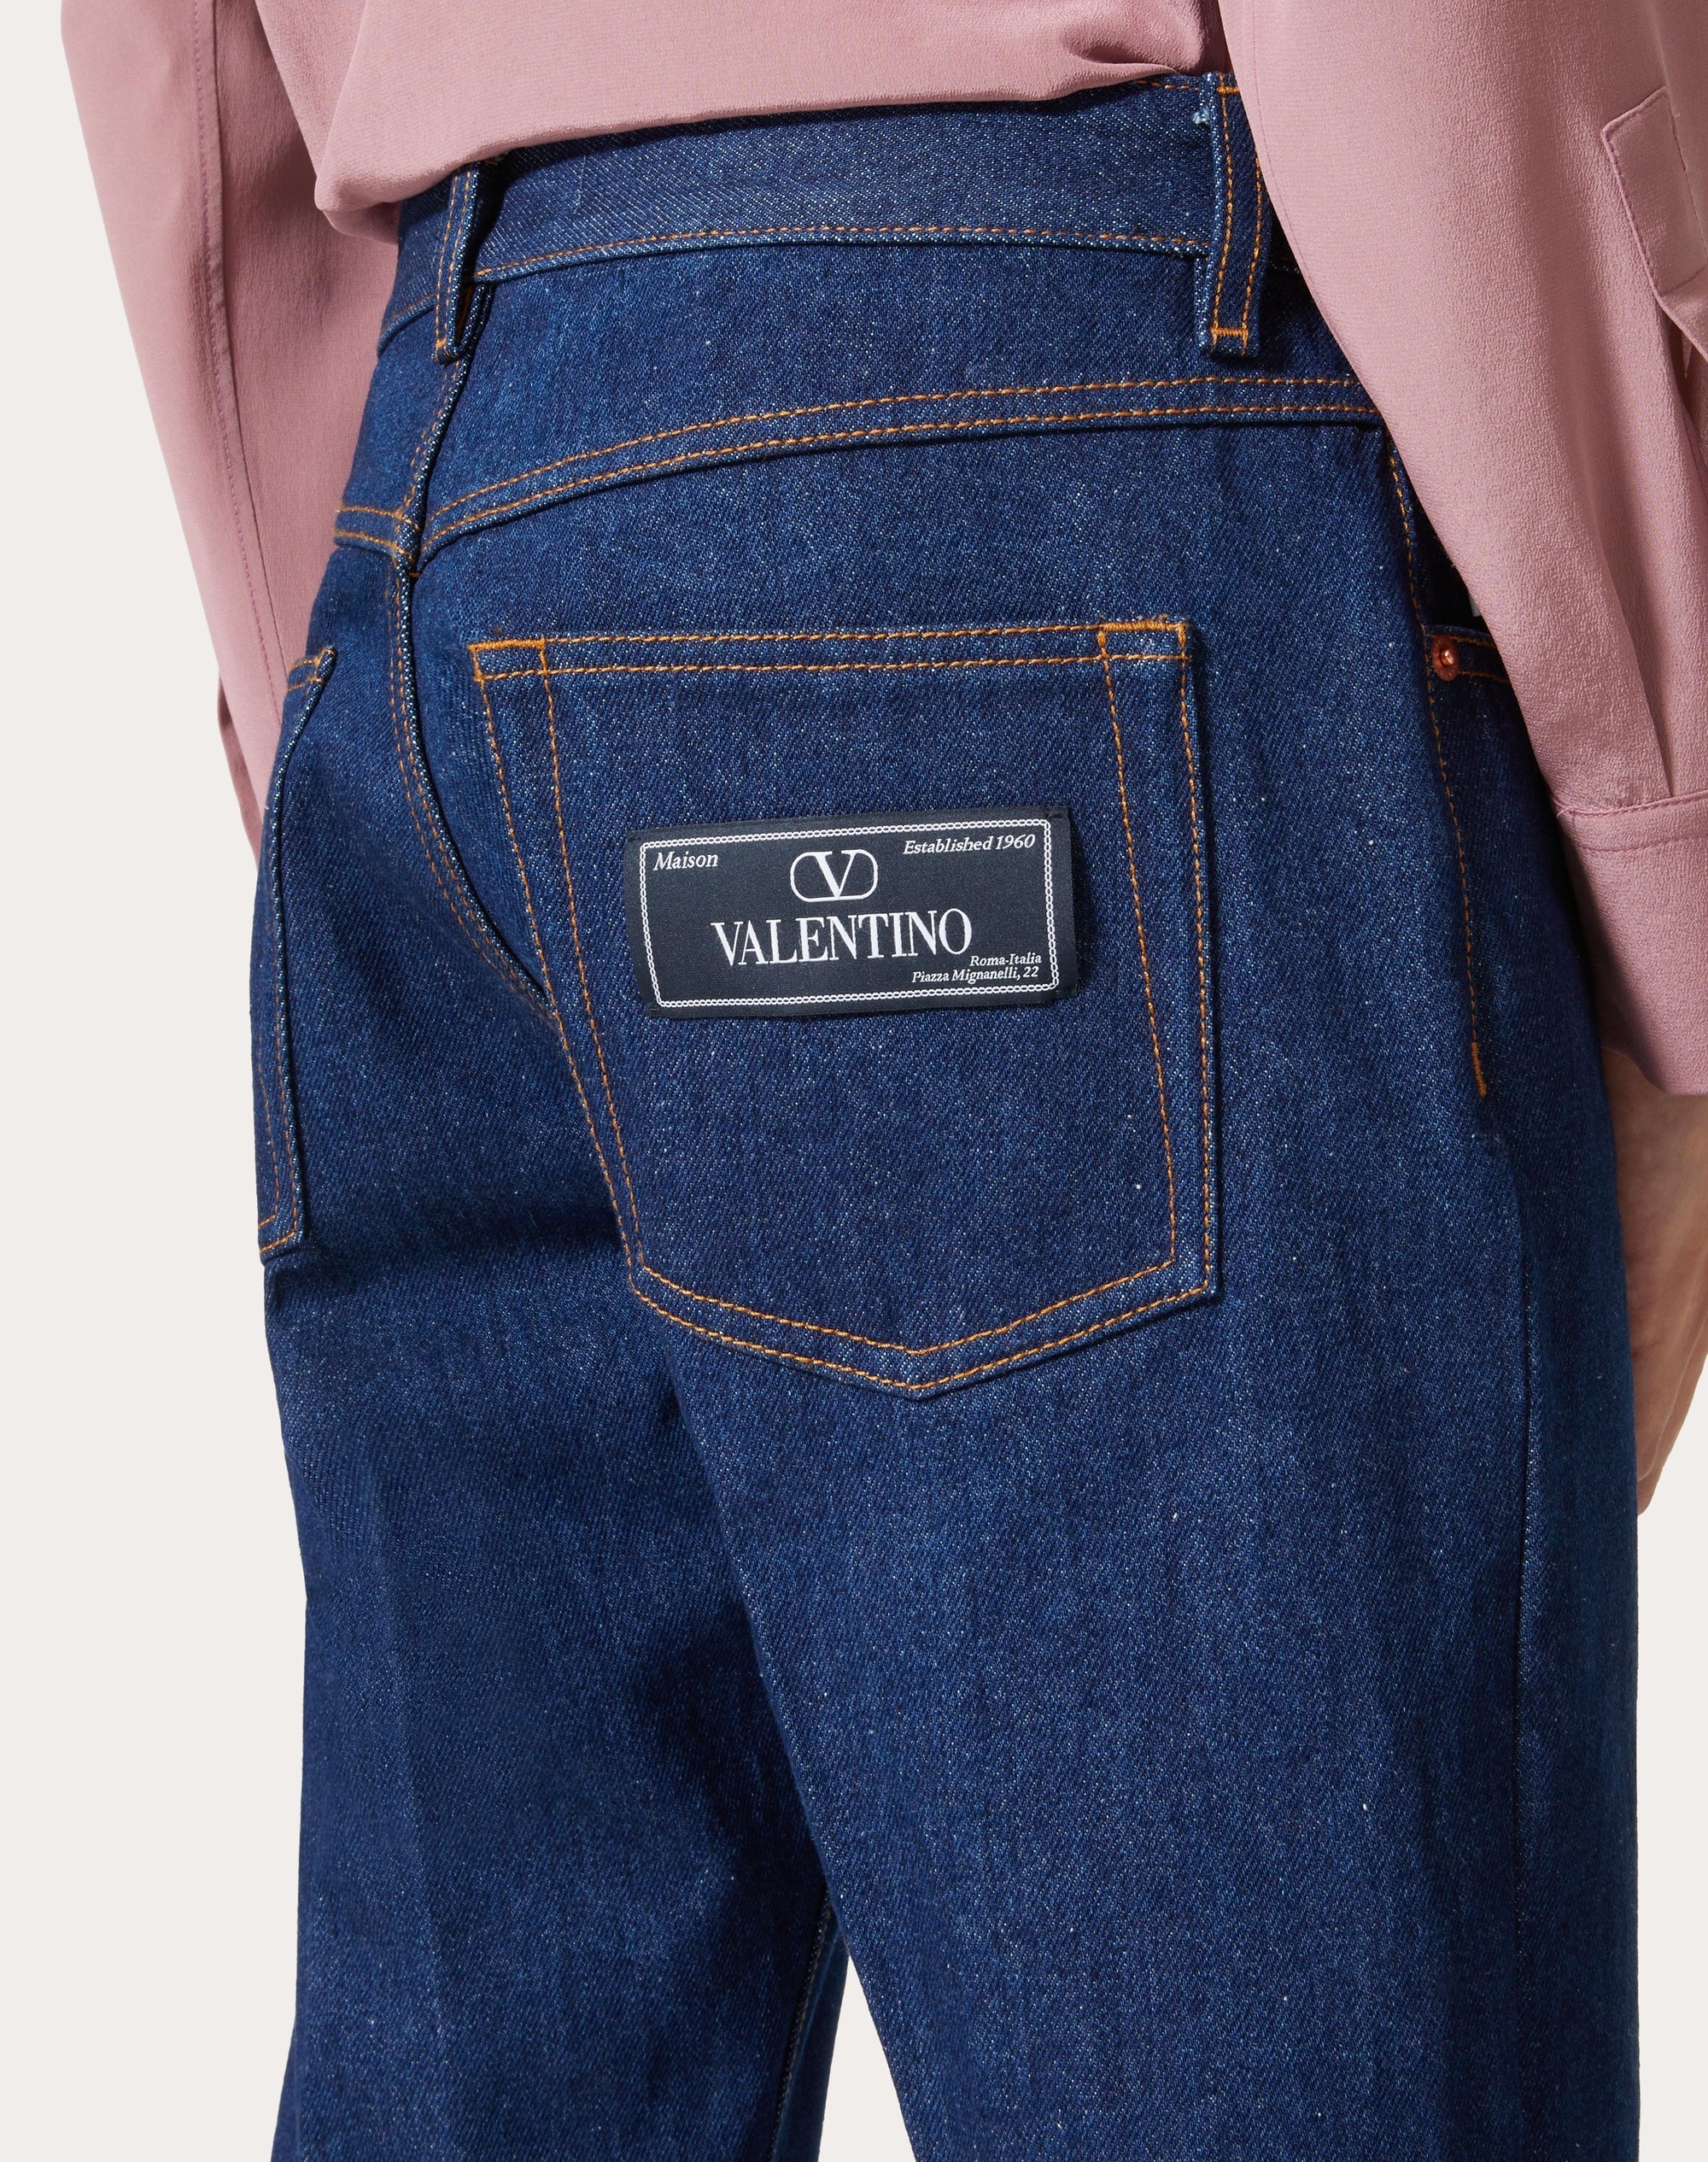 DENIM PANTS WITH MAISON VALENTINO TAILORING LABEL - 4